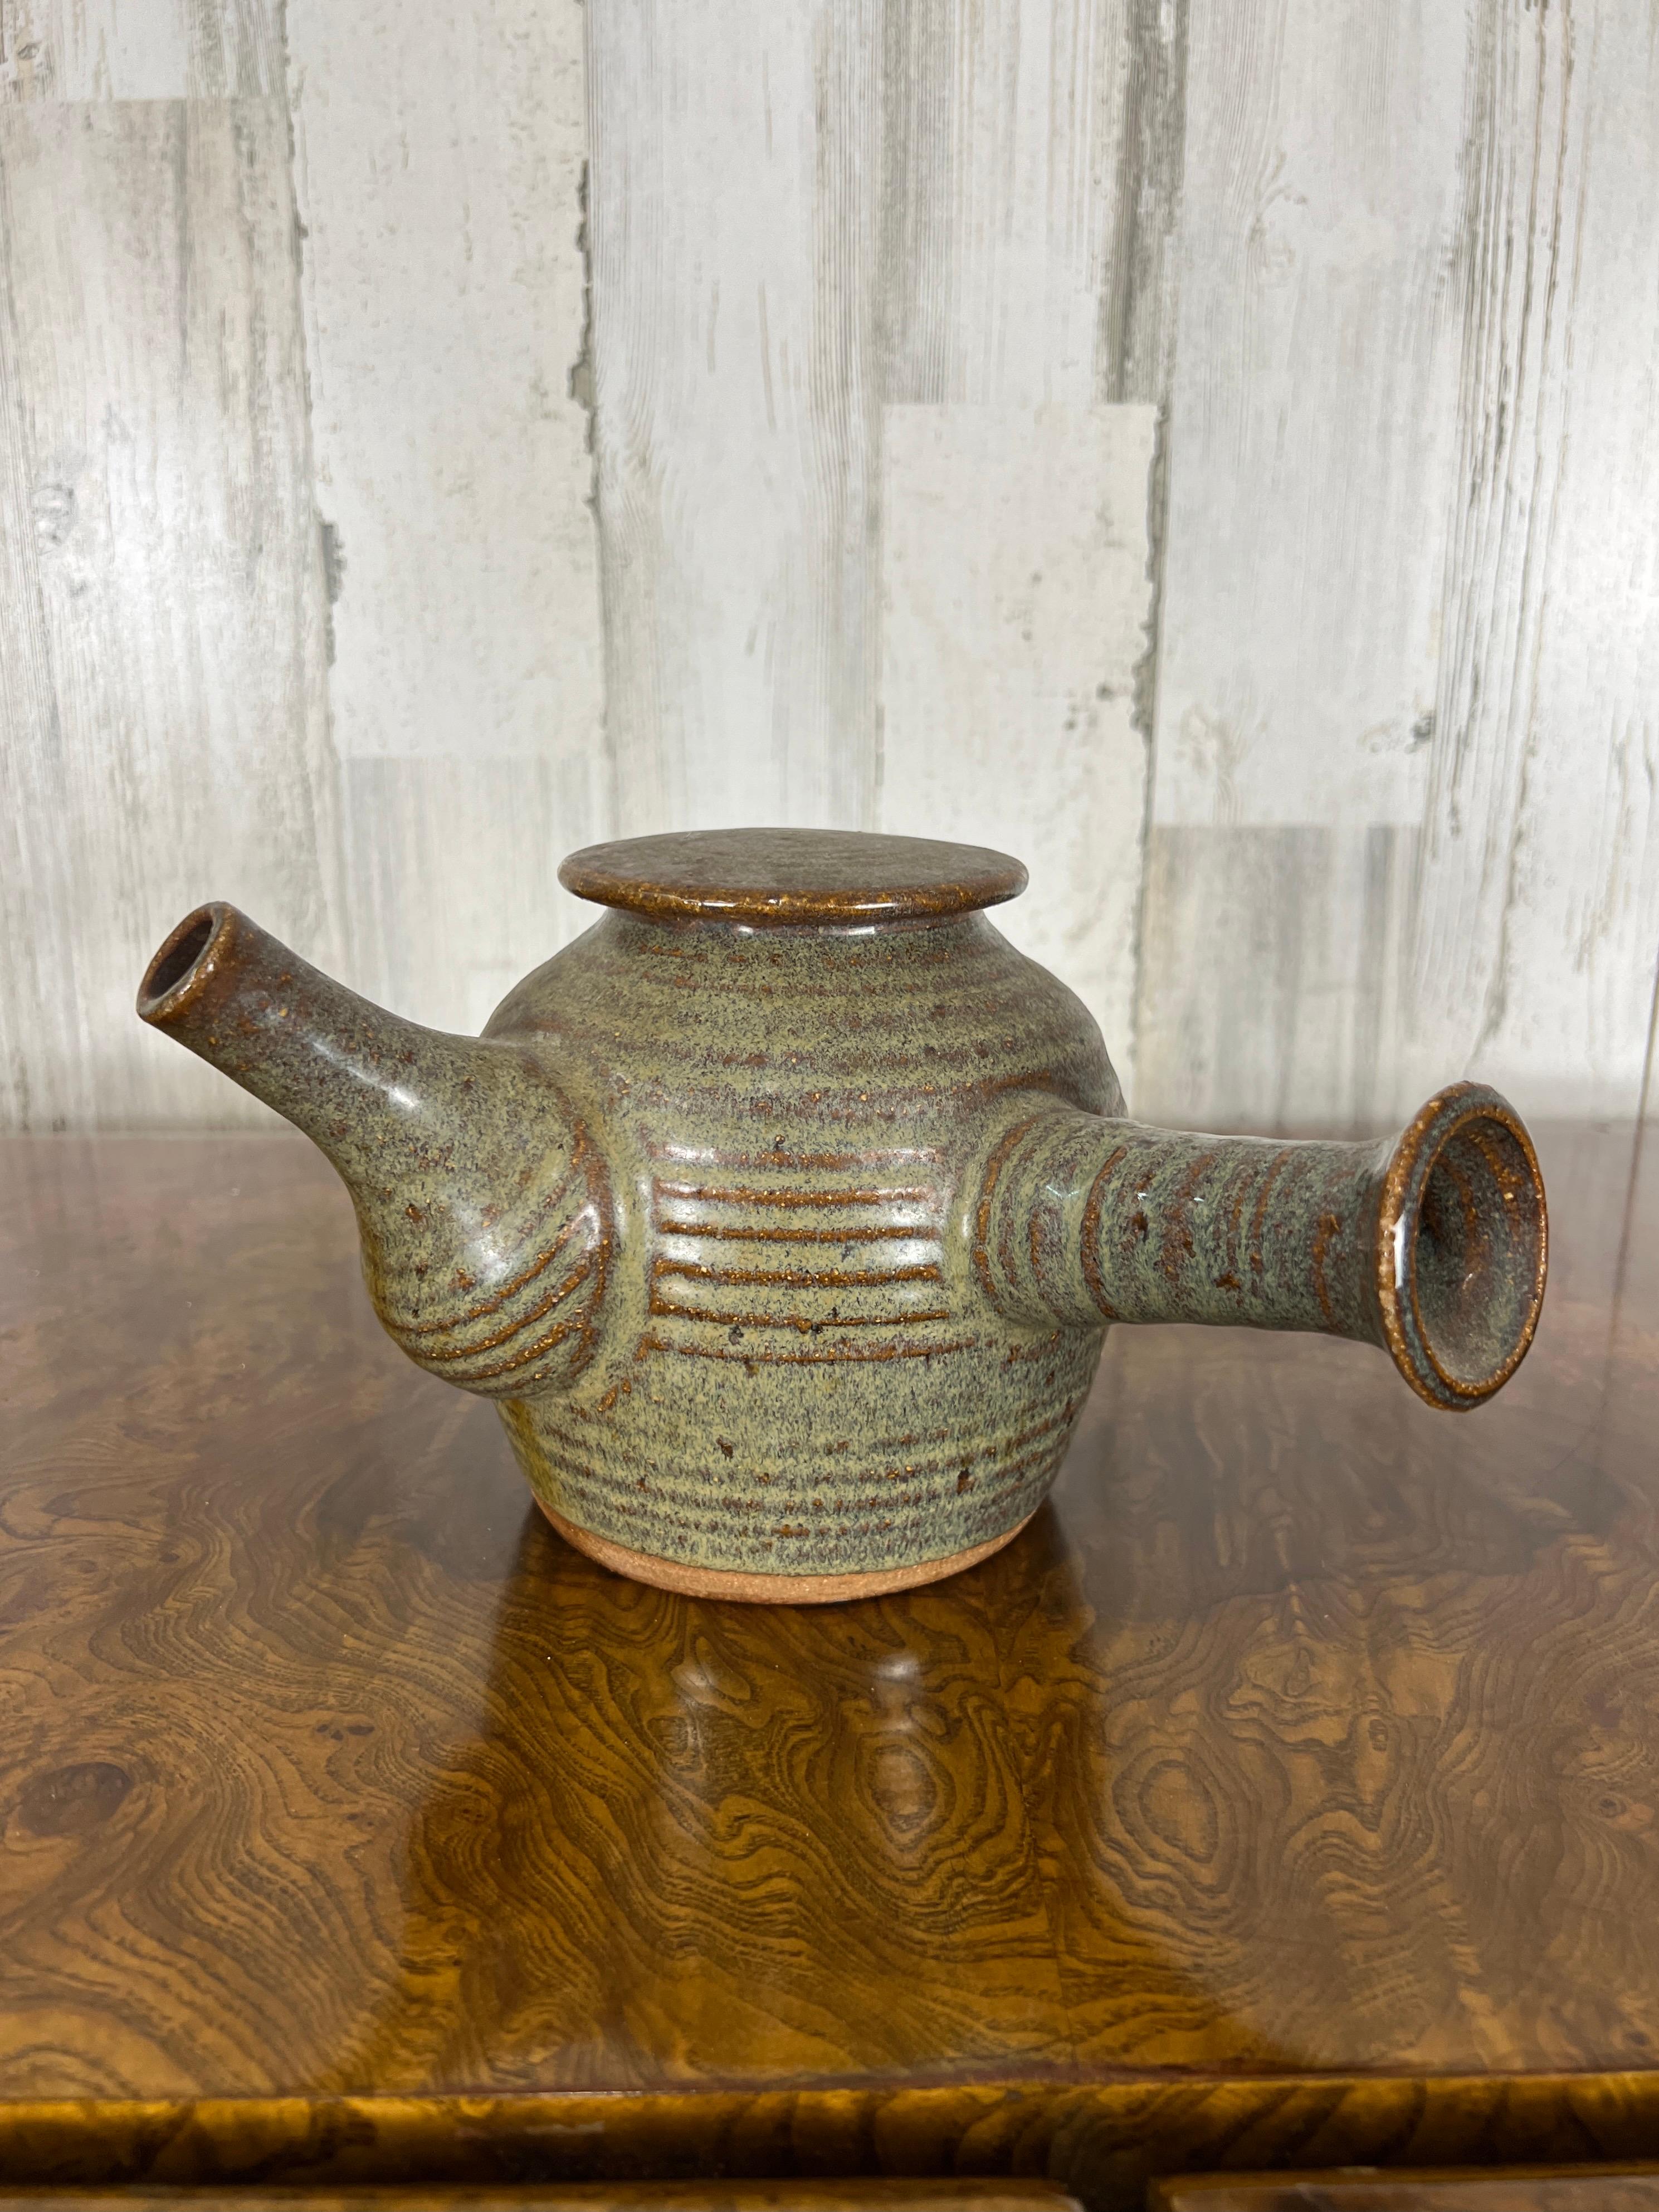 Unusual tea pot with the handle mounted on the side.